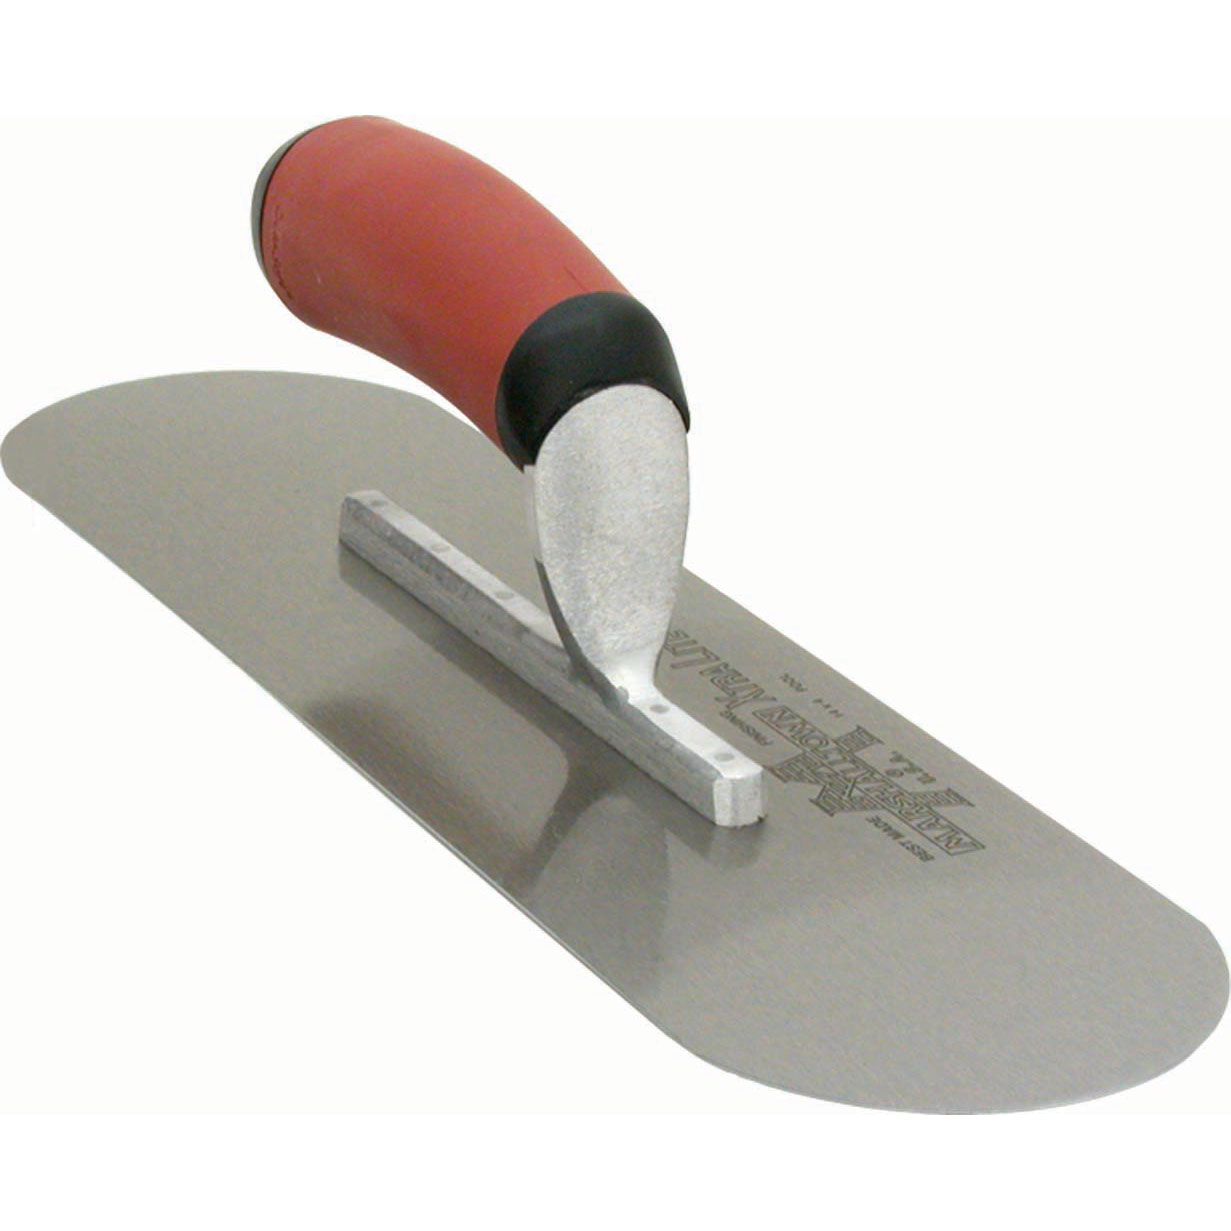 Marshalltown SP14PD 14in x 4in PoolSaver Trowel with DuraSoft Handle SP14PD